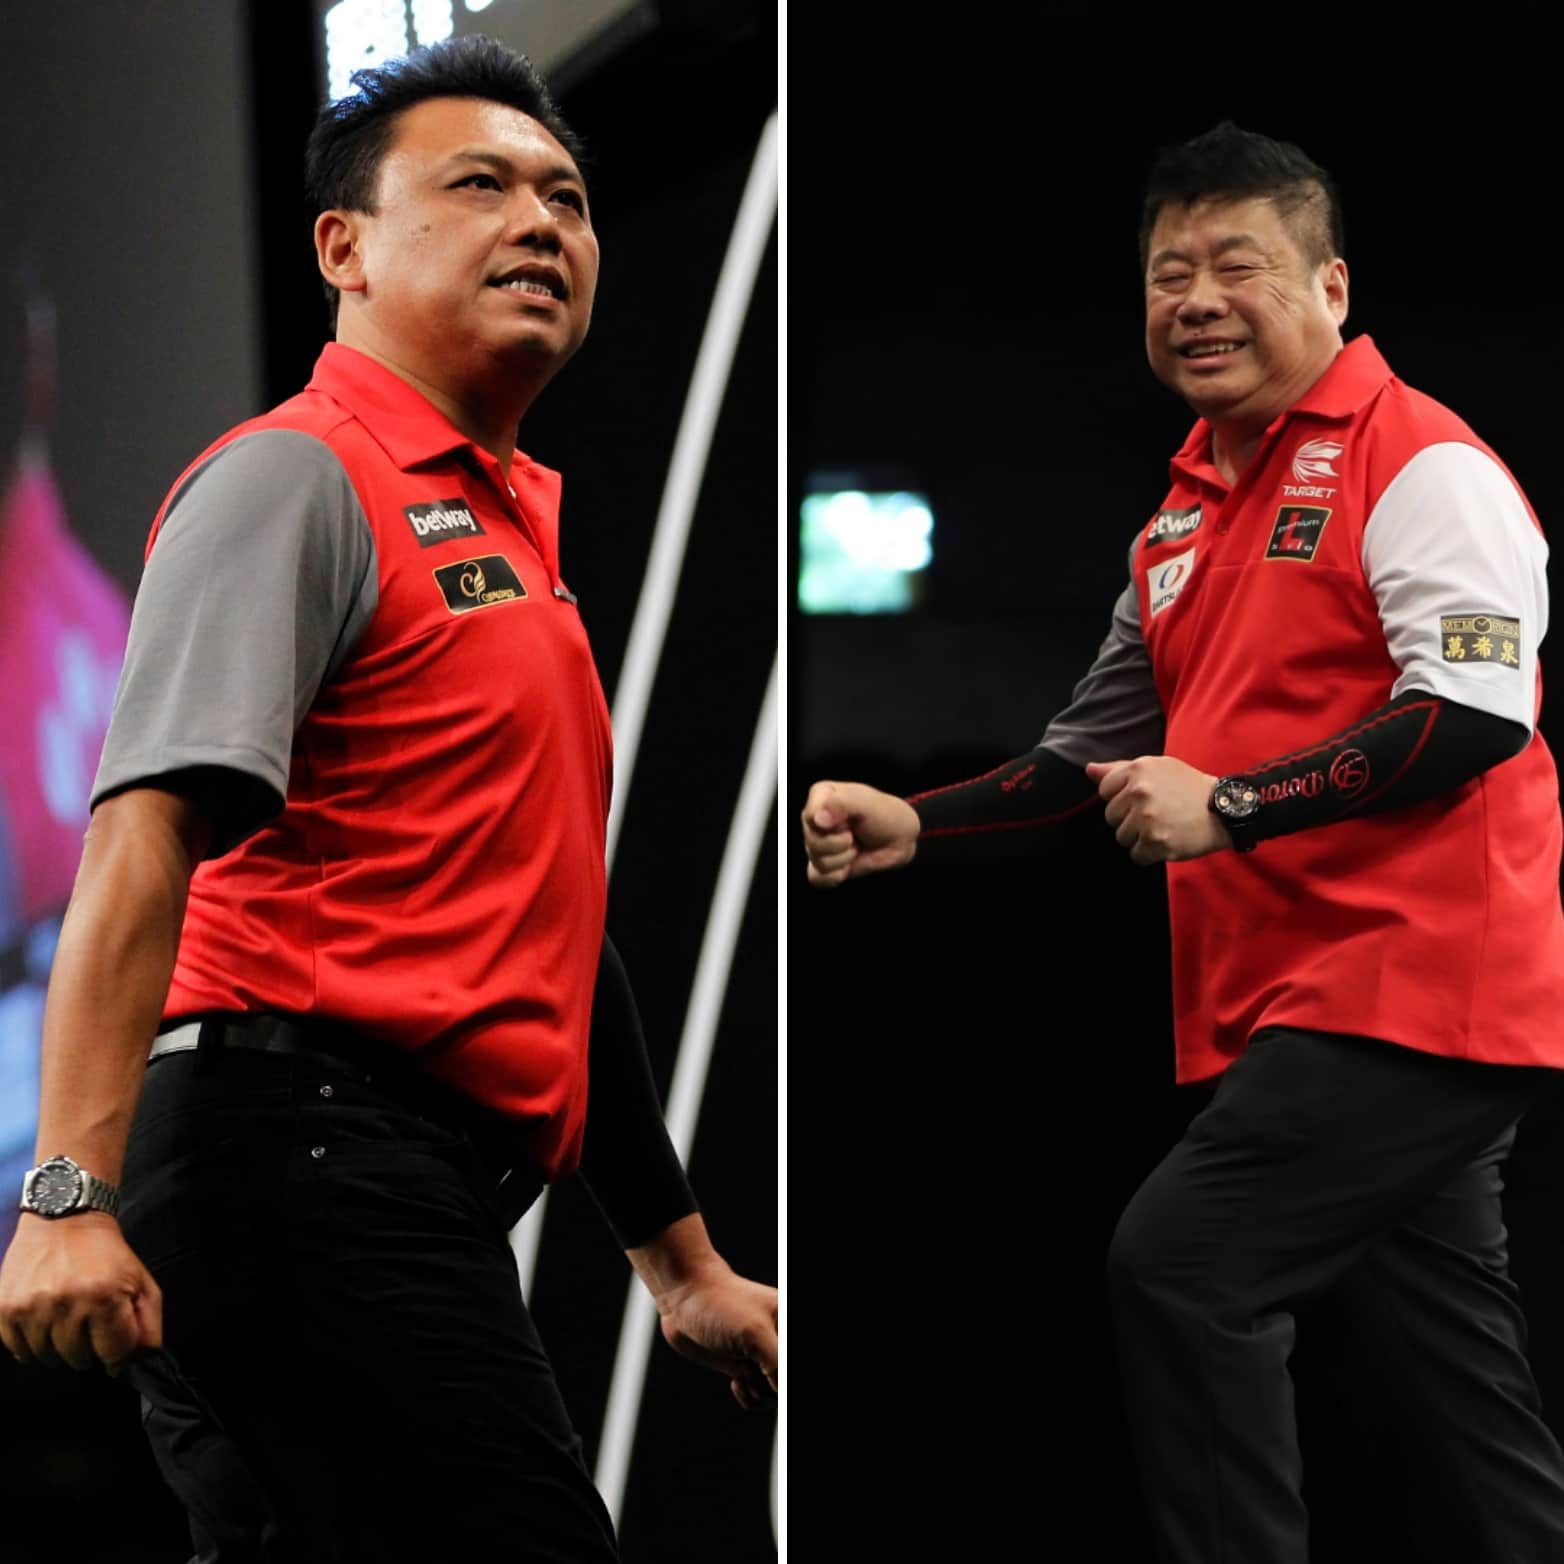 Meet the World Cup of Darts 2019 teams: Russia and Singapore